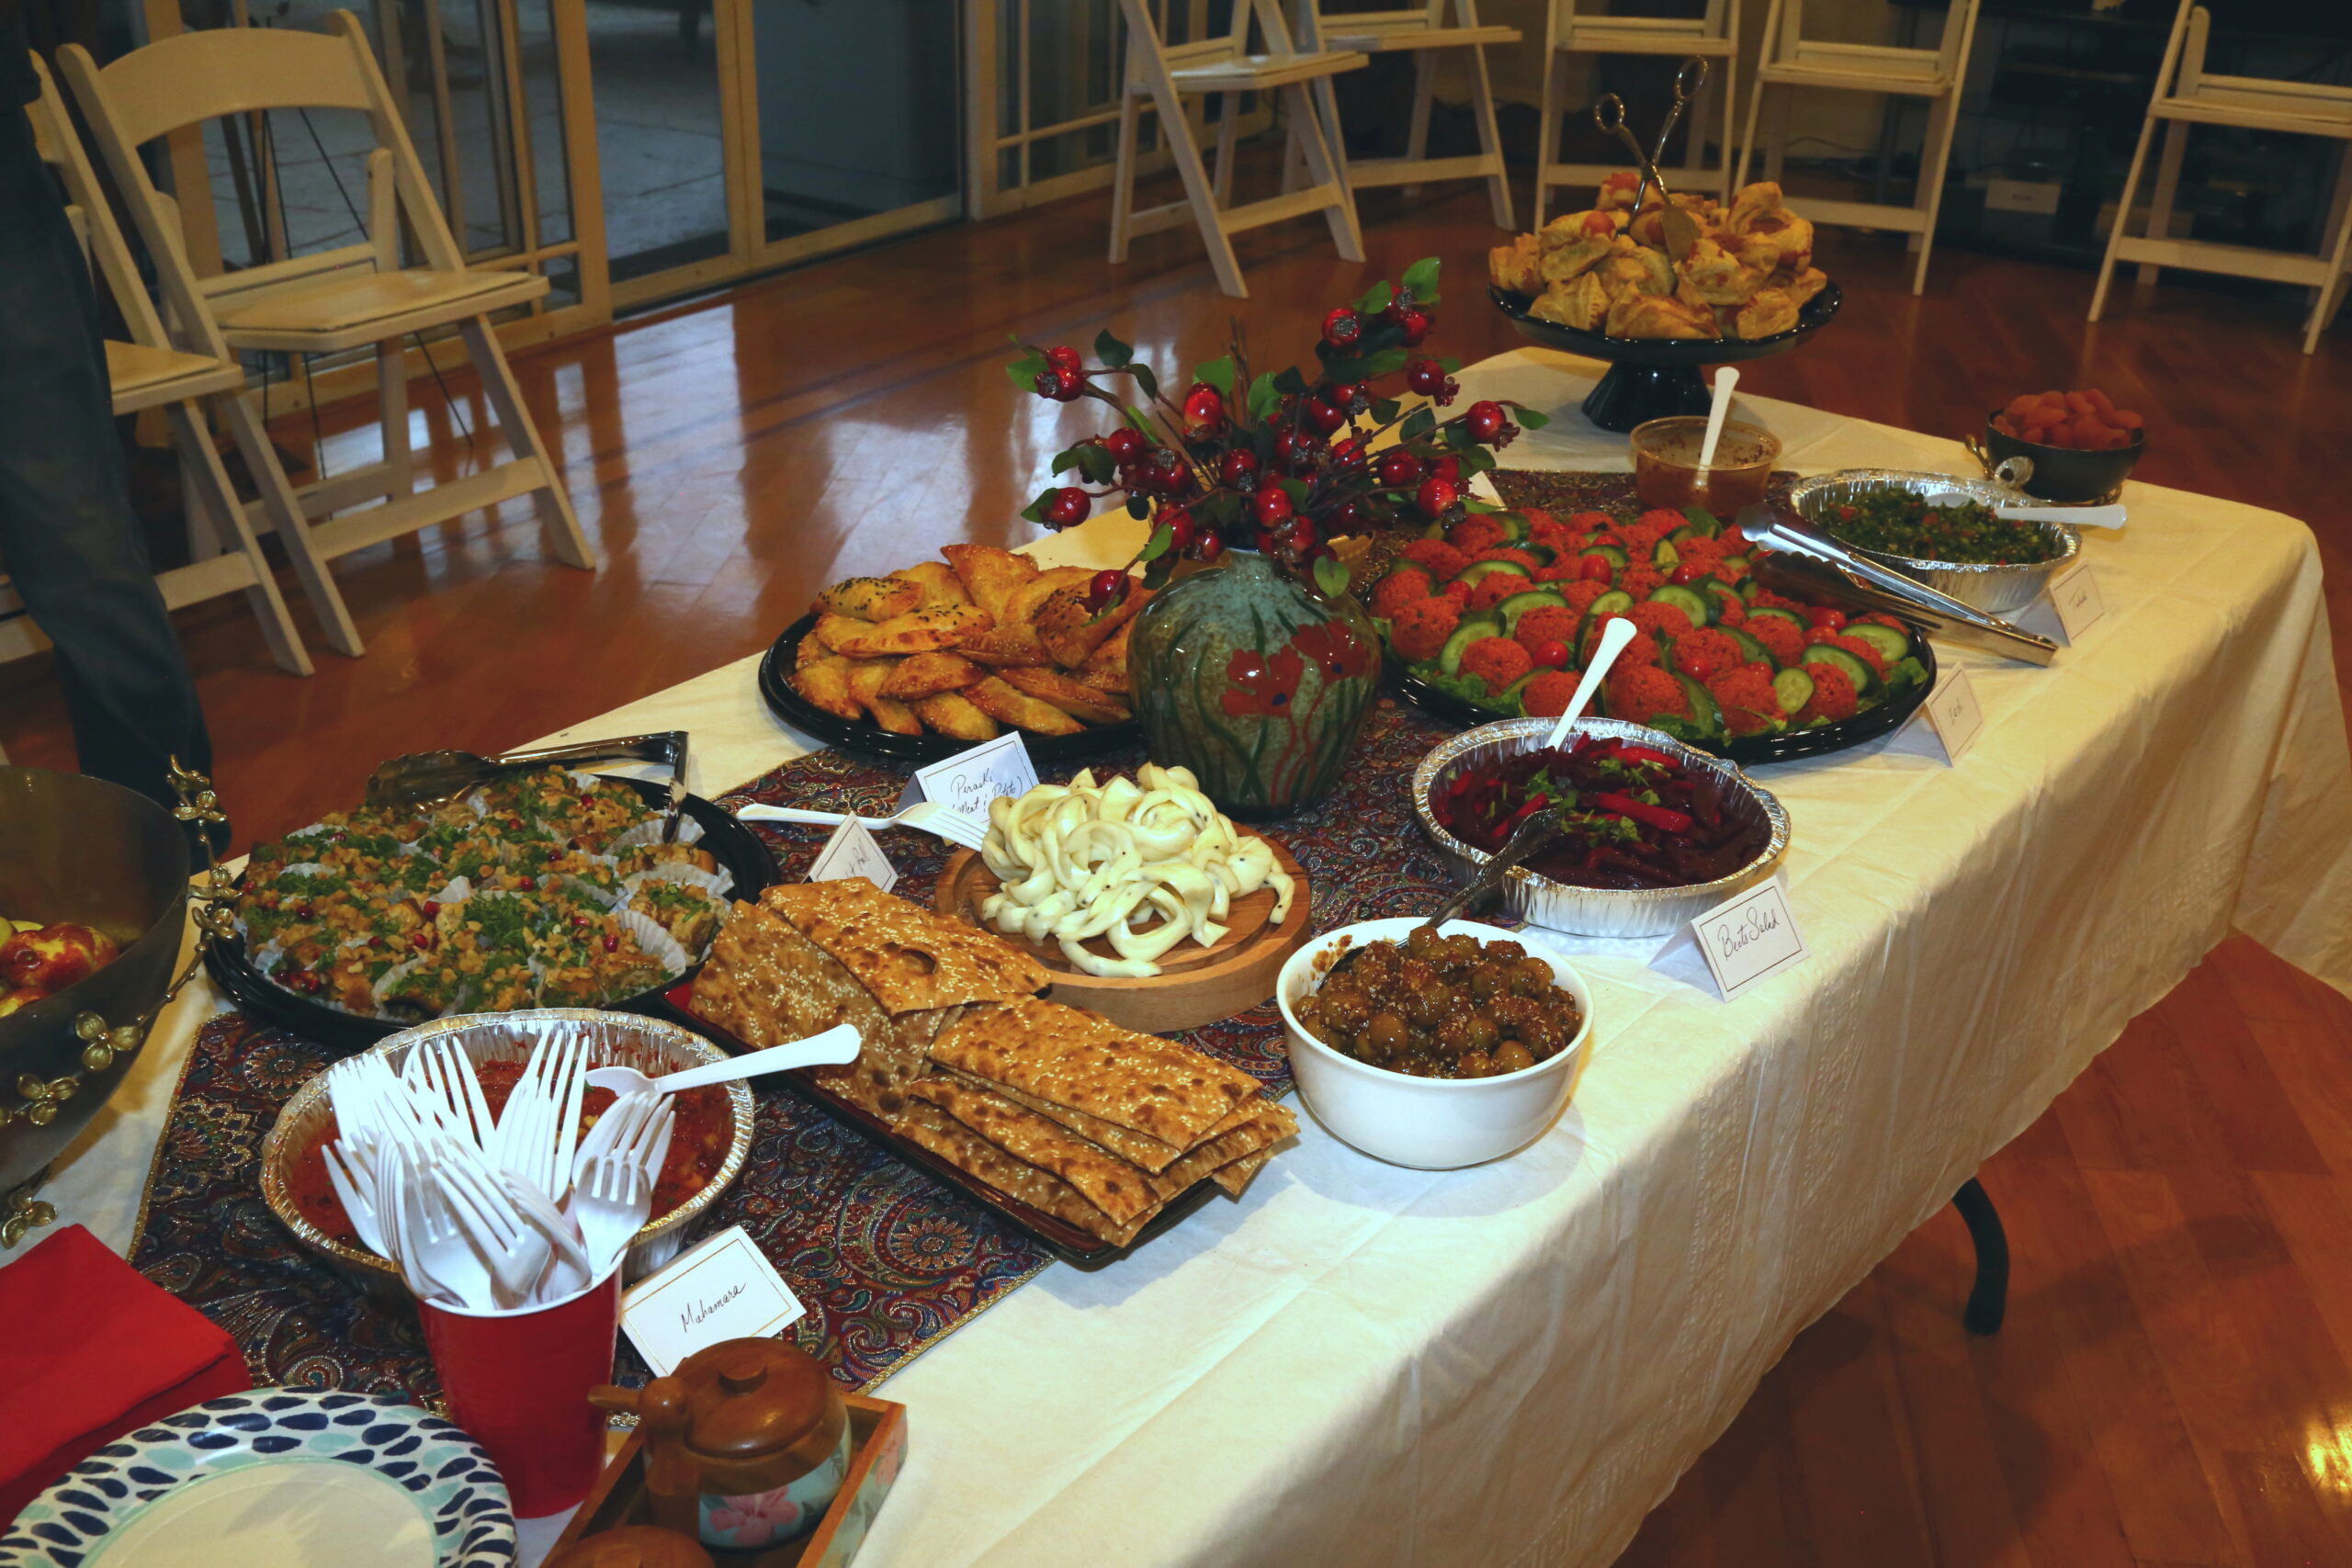 Armenian dishes covering a serving table